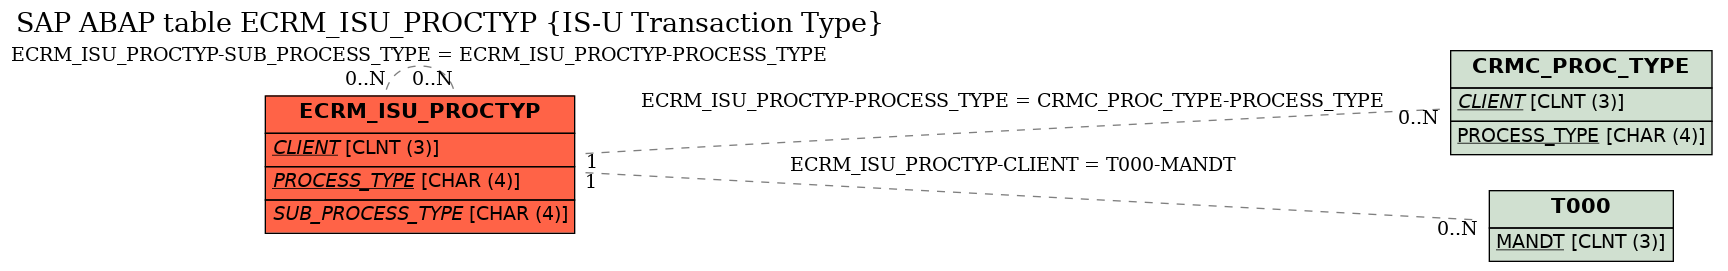 E-R Diagram for table ECRM_ISU_PROCTYP (IS-U Transaction Type)